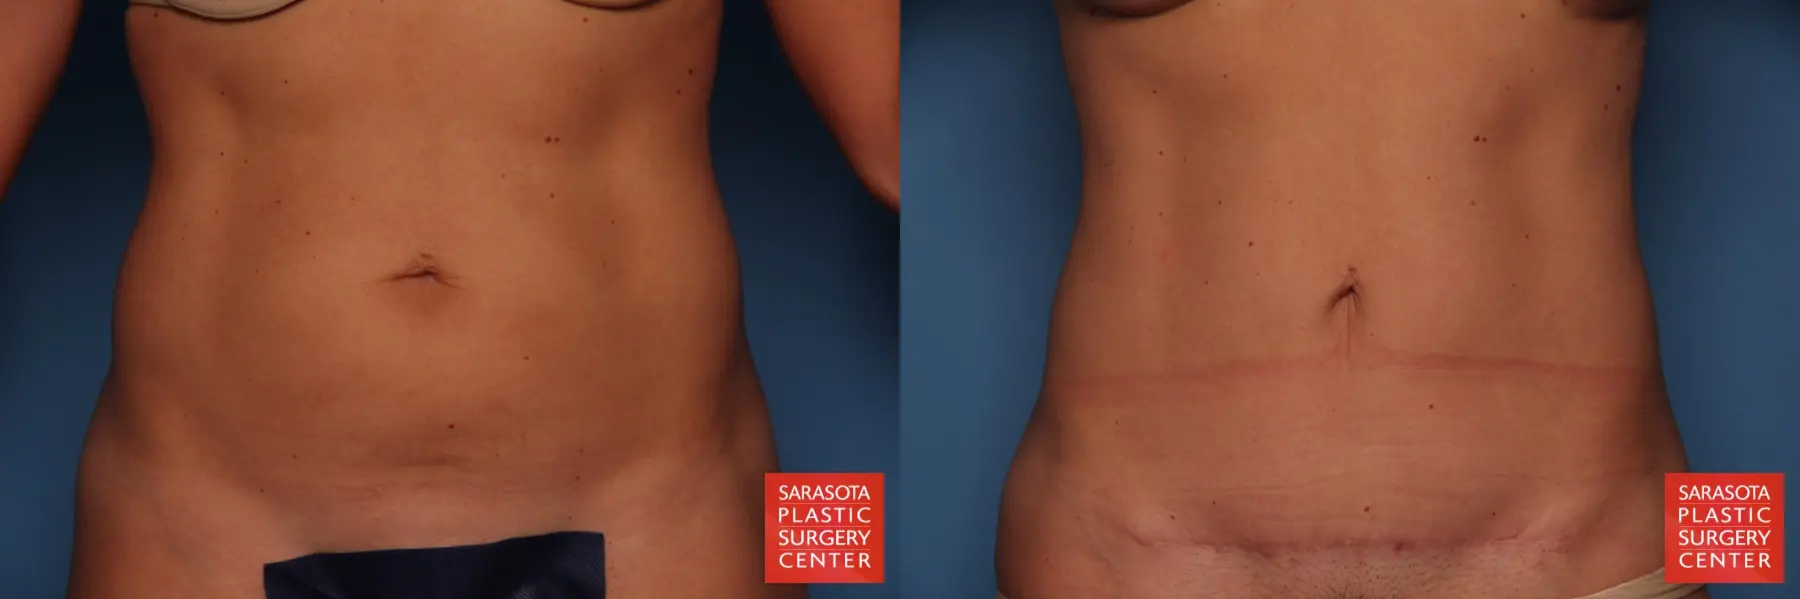 Lower Tummy Tuck : Patient 1 - Before and After  